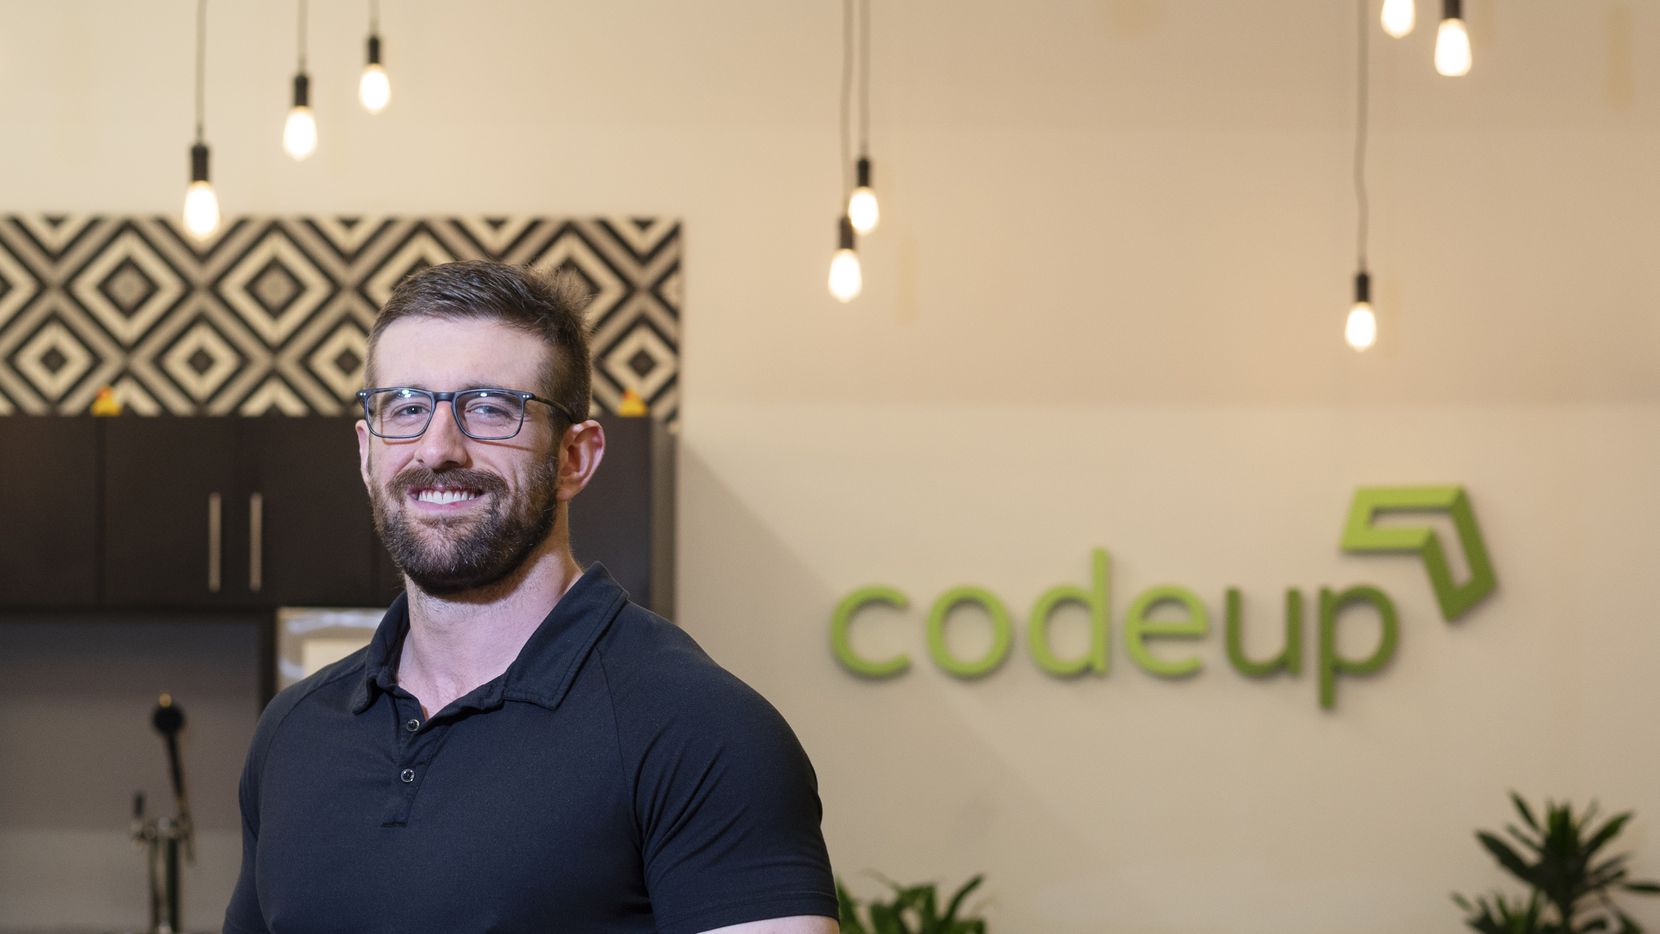 Kole Morgan, 32, one of the students at Codeup Dallas, inside their training center in downtown Dallas, on Wednesday, Feb. 10, 2021. Codeup Dallas is a 22 week program that offers training for students interested in a career in web development and data science, and matches their students with employers for full-time opportunities after graduation.